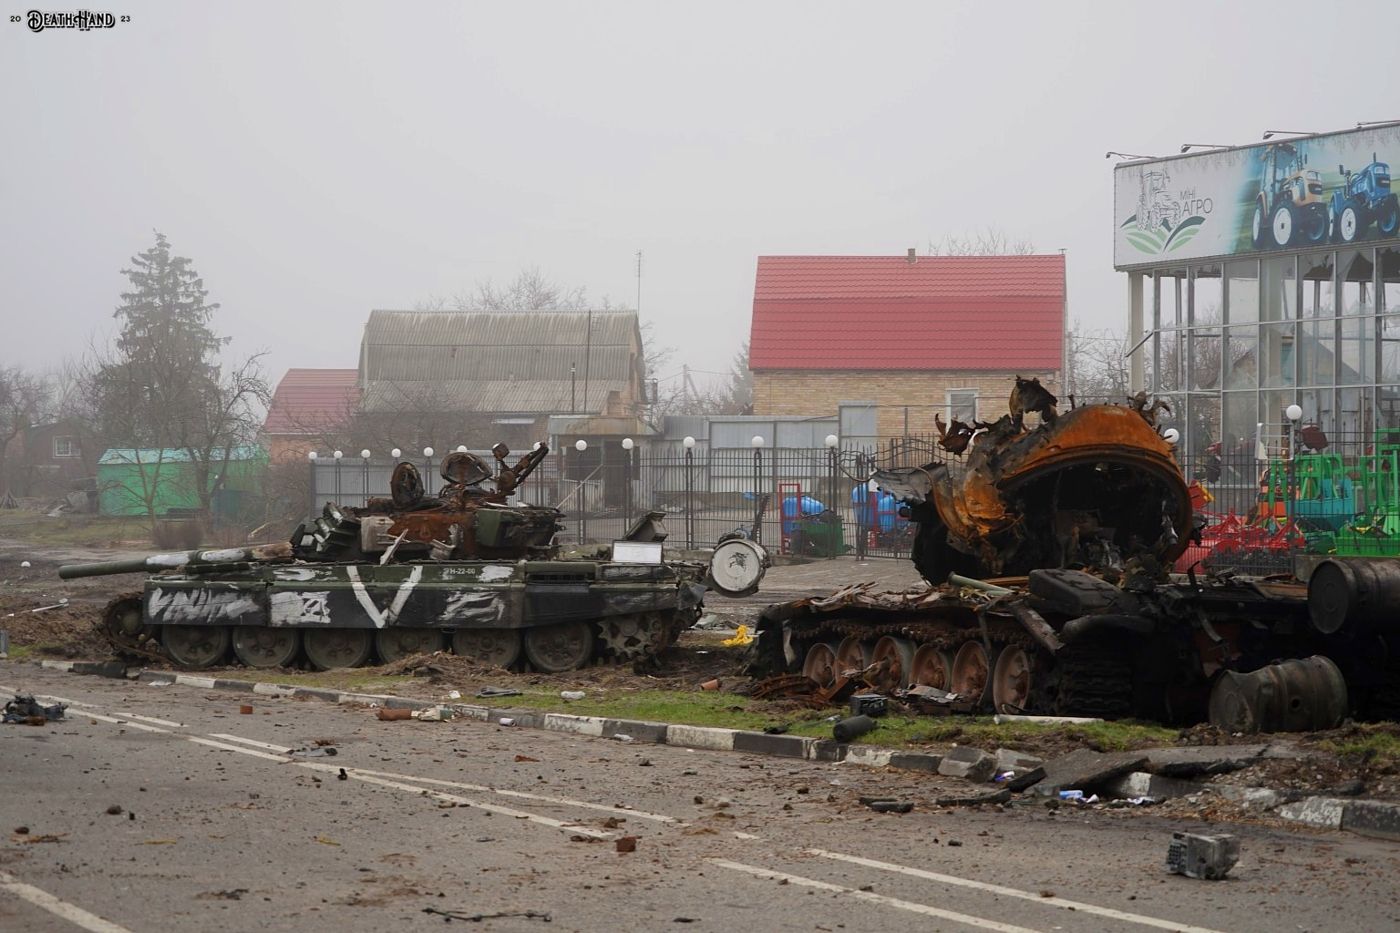 DH - M06 highway carnage beetween towns of Mriia and Myla - Ukraine 30 - early April 2022.jpg